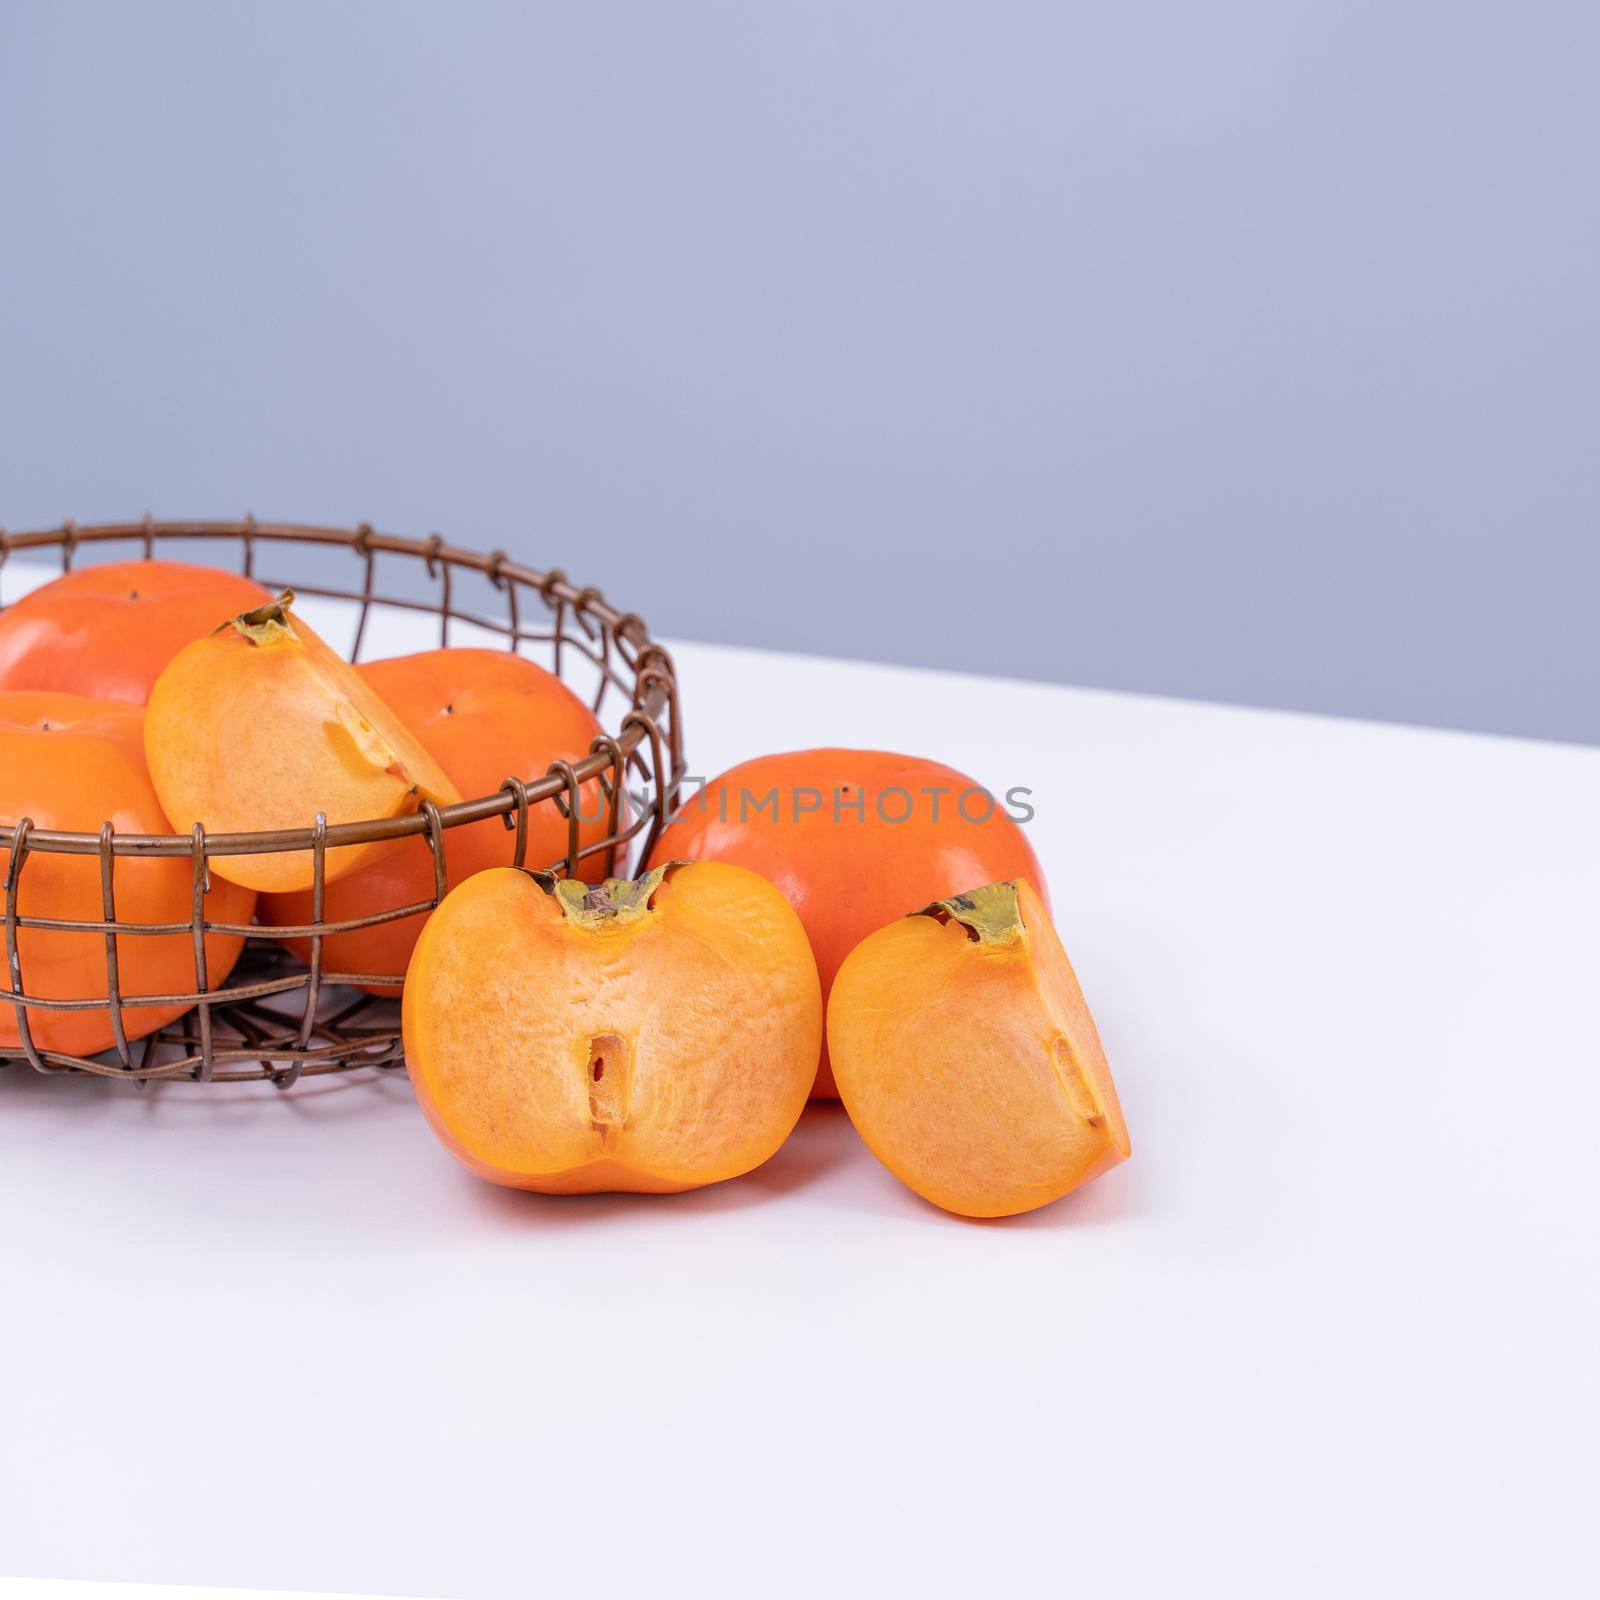 Fresh beautiful sliced sweet persimmon kaki isolated on white kitchen table with gray blue background, Chinese lunar new year design concept, close up. by ROMIXIMAGE